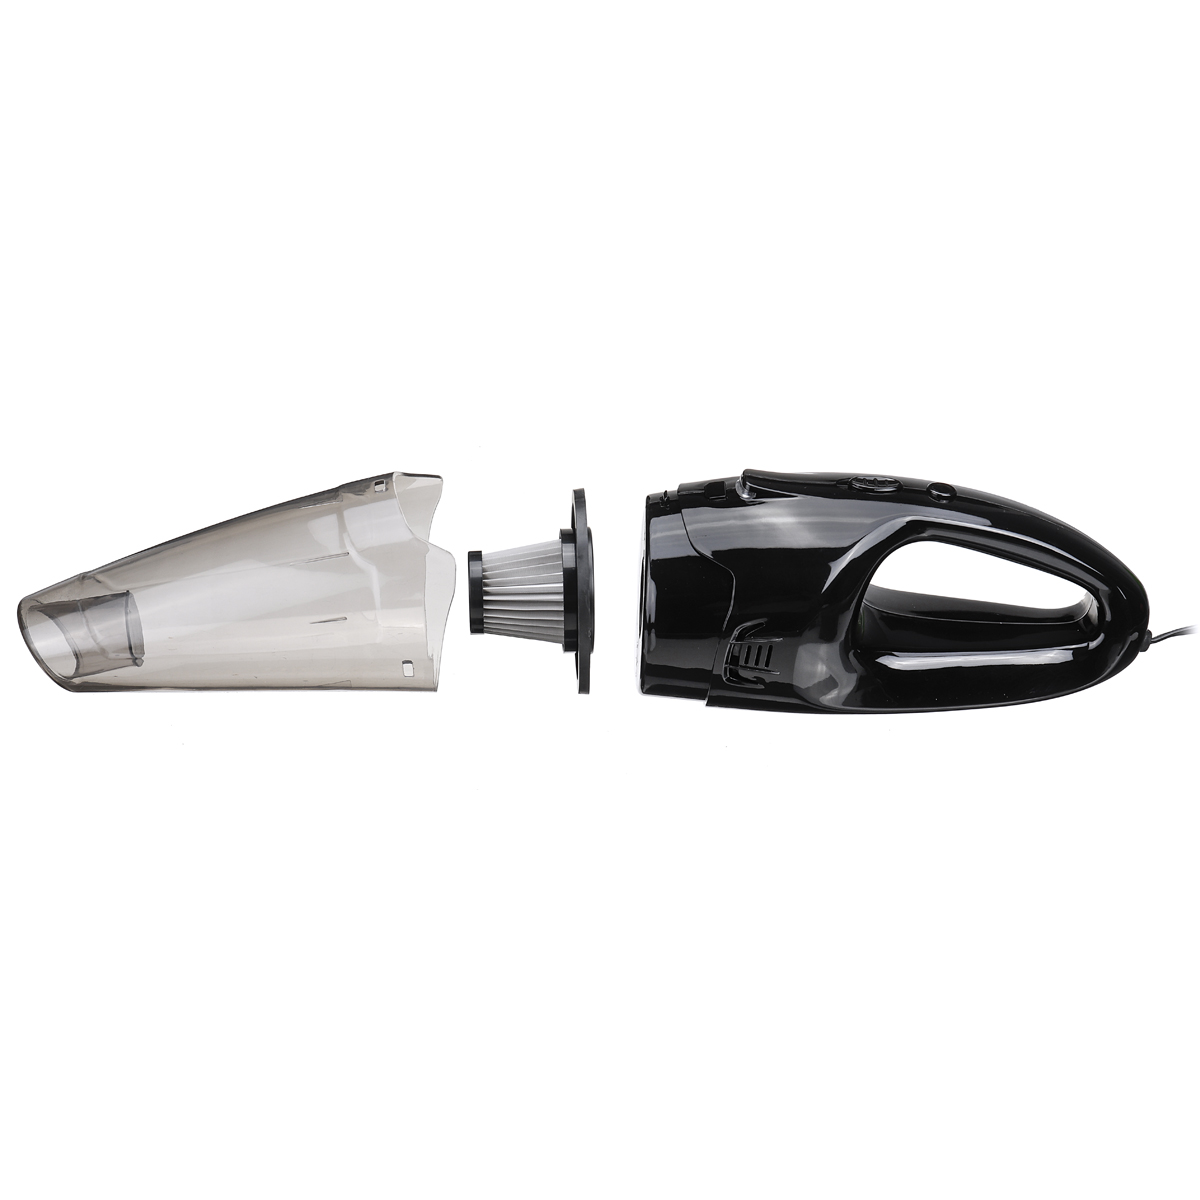 120W 4500PA Car Vacuum Cleaner Duster Handheld Corded Portable Wet & Dry Cleaning - Auto GoShop